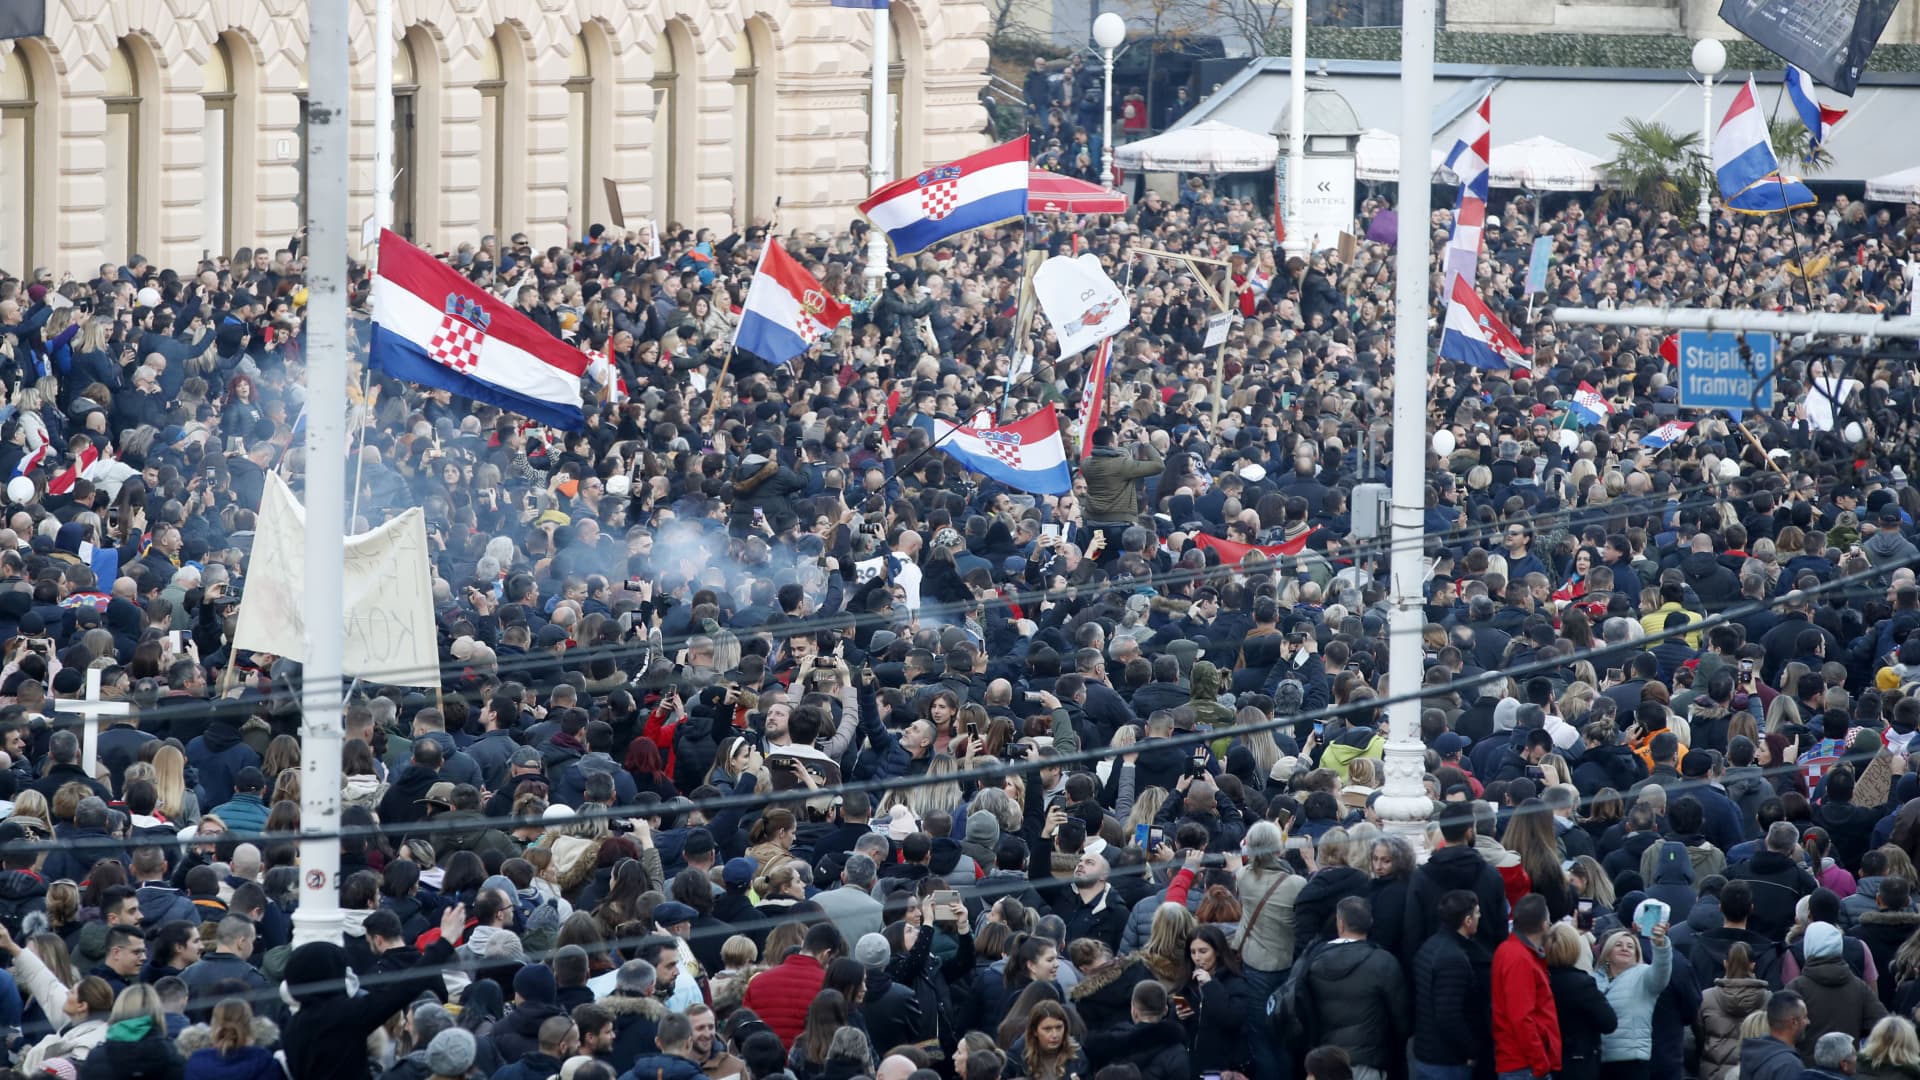 Thousands of people stage a protest against Covid-19 measures in Zagreb, Croatia on 20 November 2021.